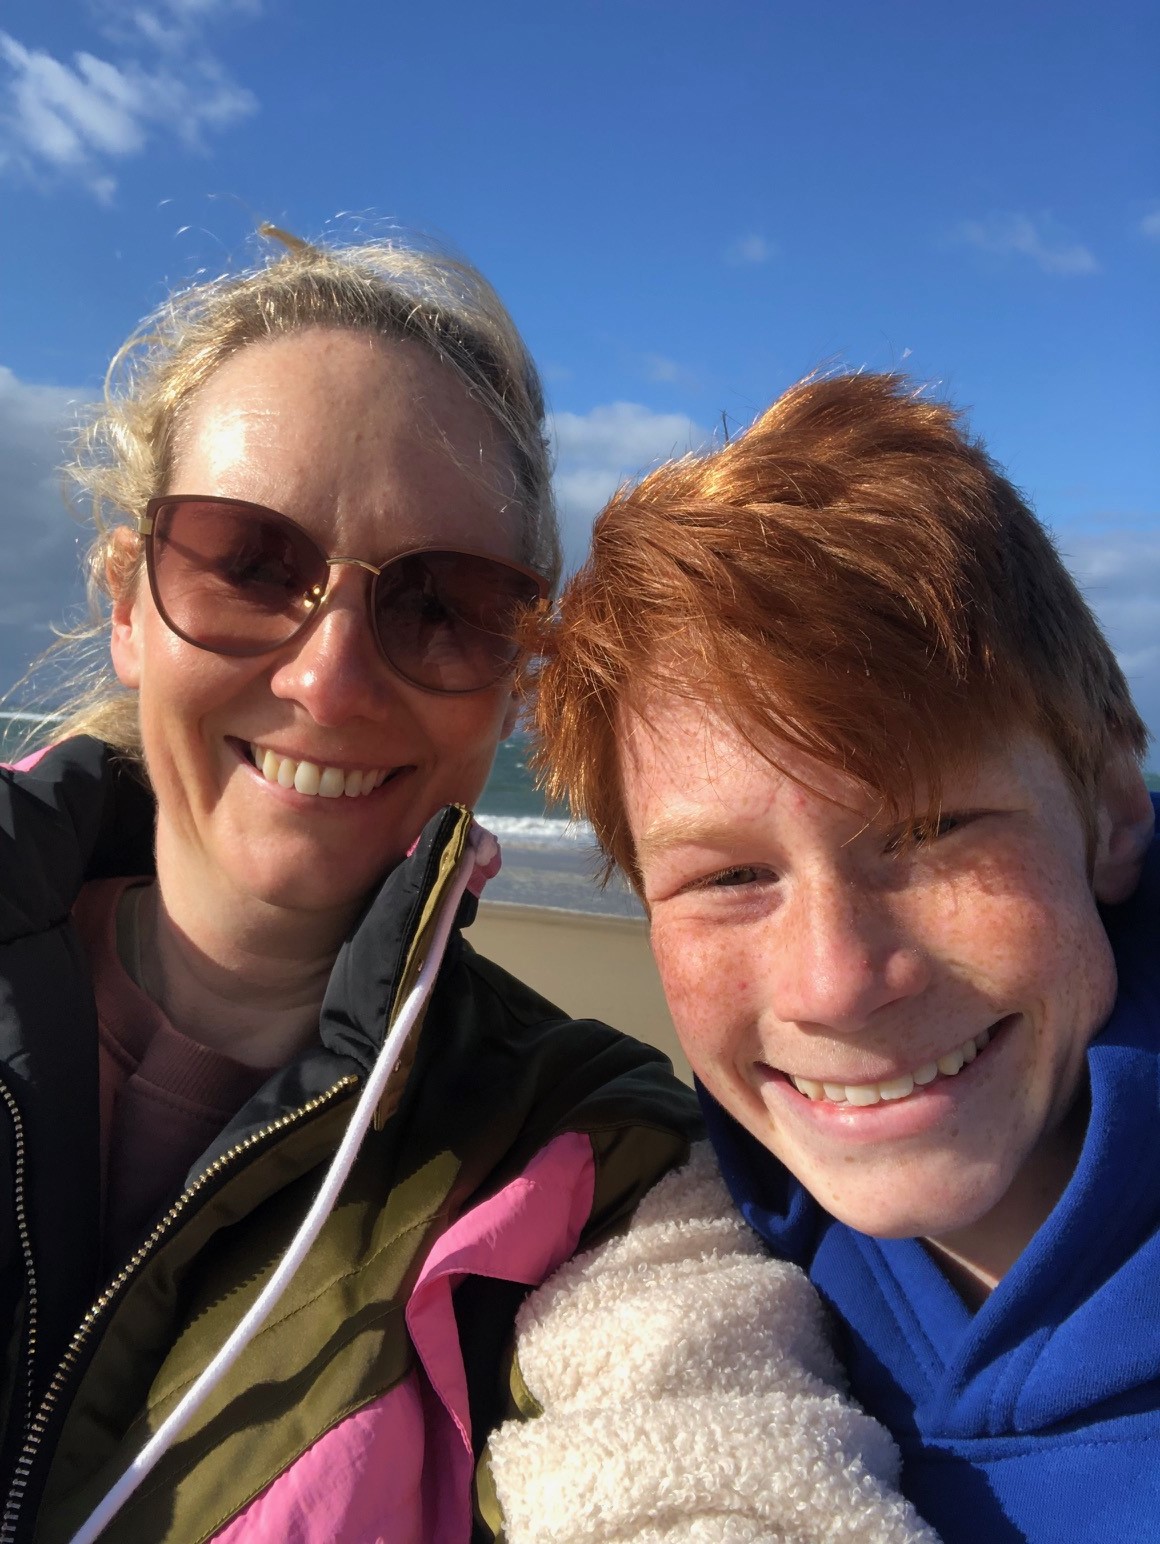 Elise and her son smile at the camera in front of an ocean view